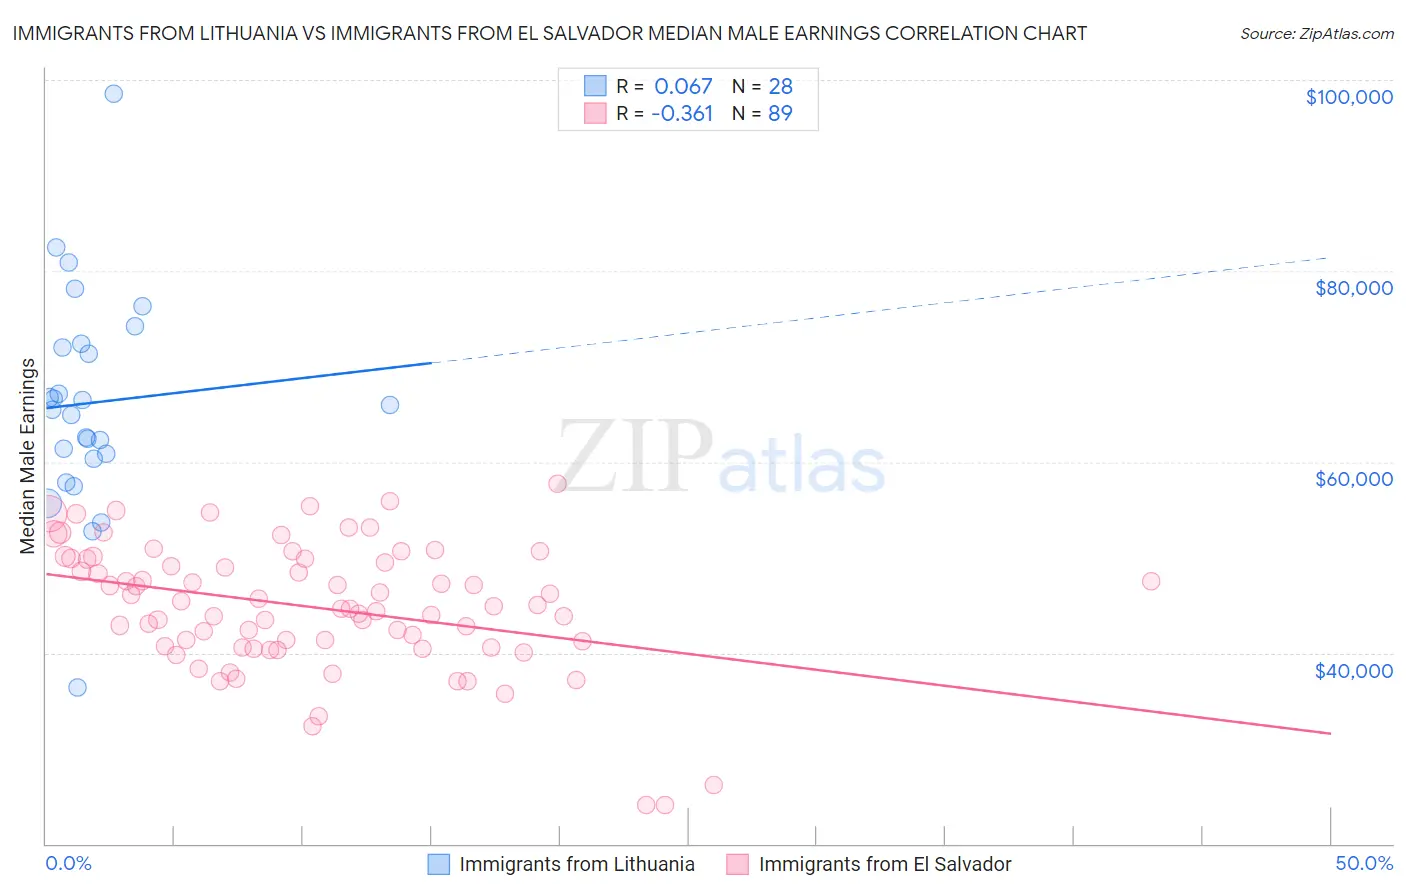 Immigrants from Lithuania vs Immigrants from El Salvador Median Male Earnings